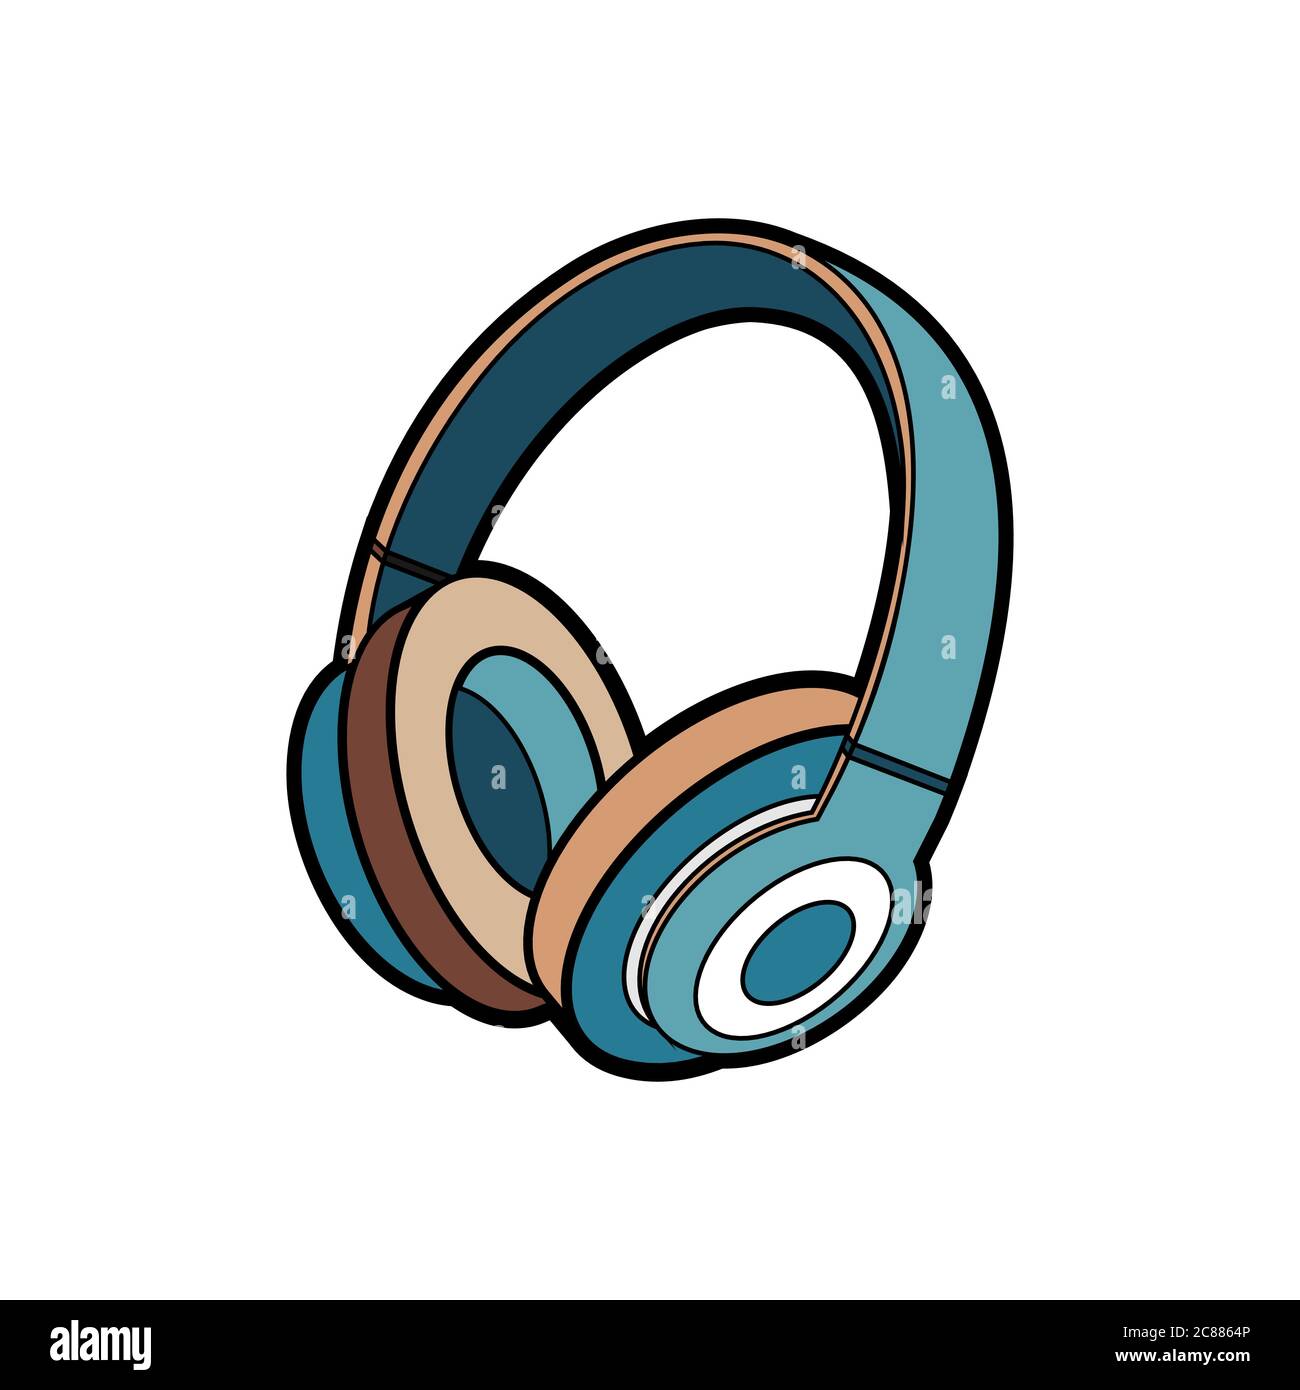 Headphones wireless blue vector isolated. Youth fashion hipster cool headphones illustration in minimalist style. Stock Vector